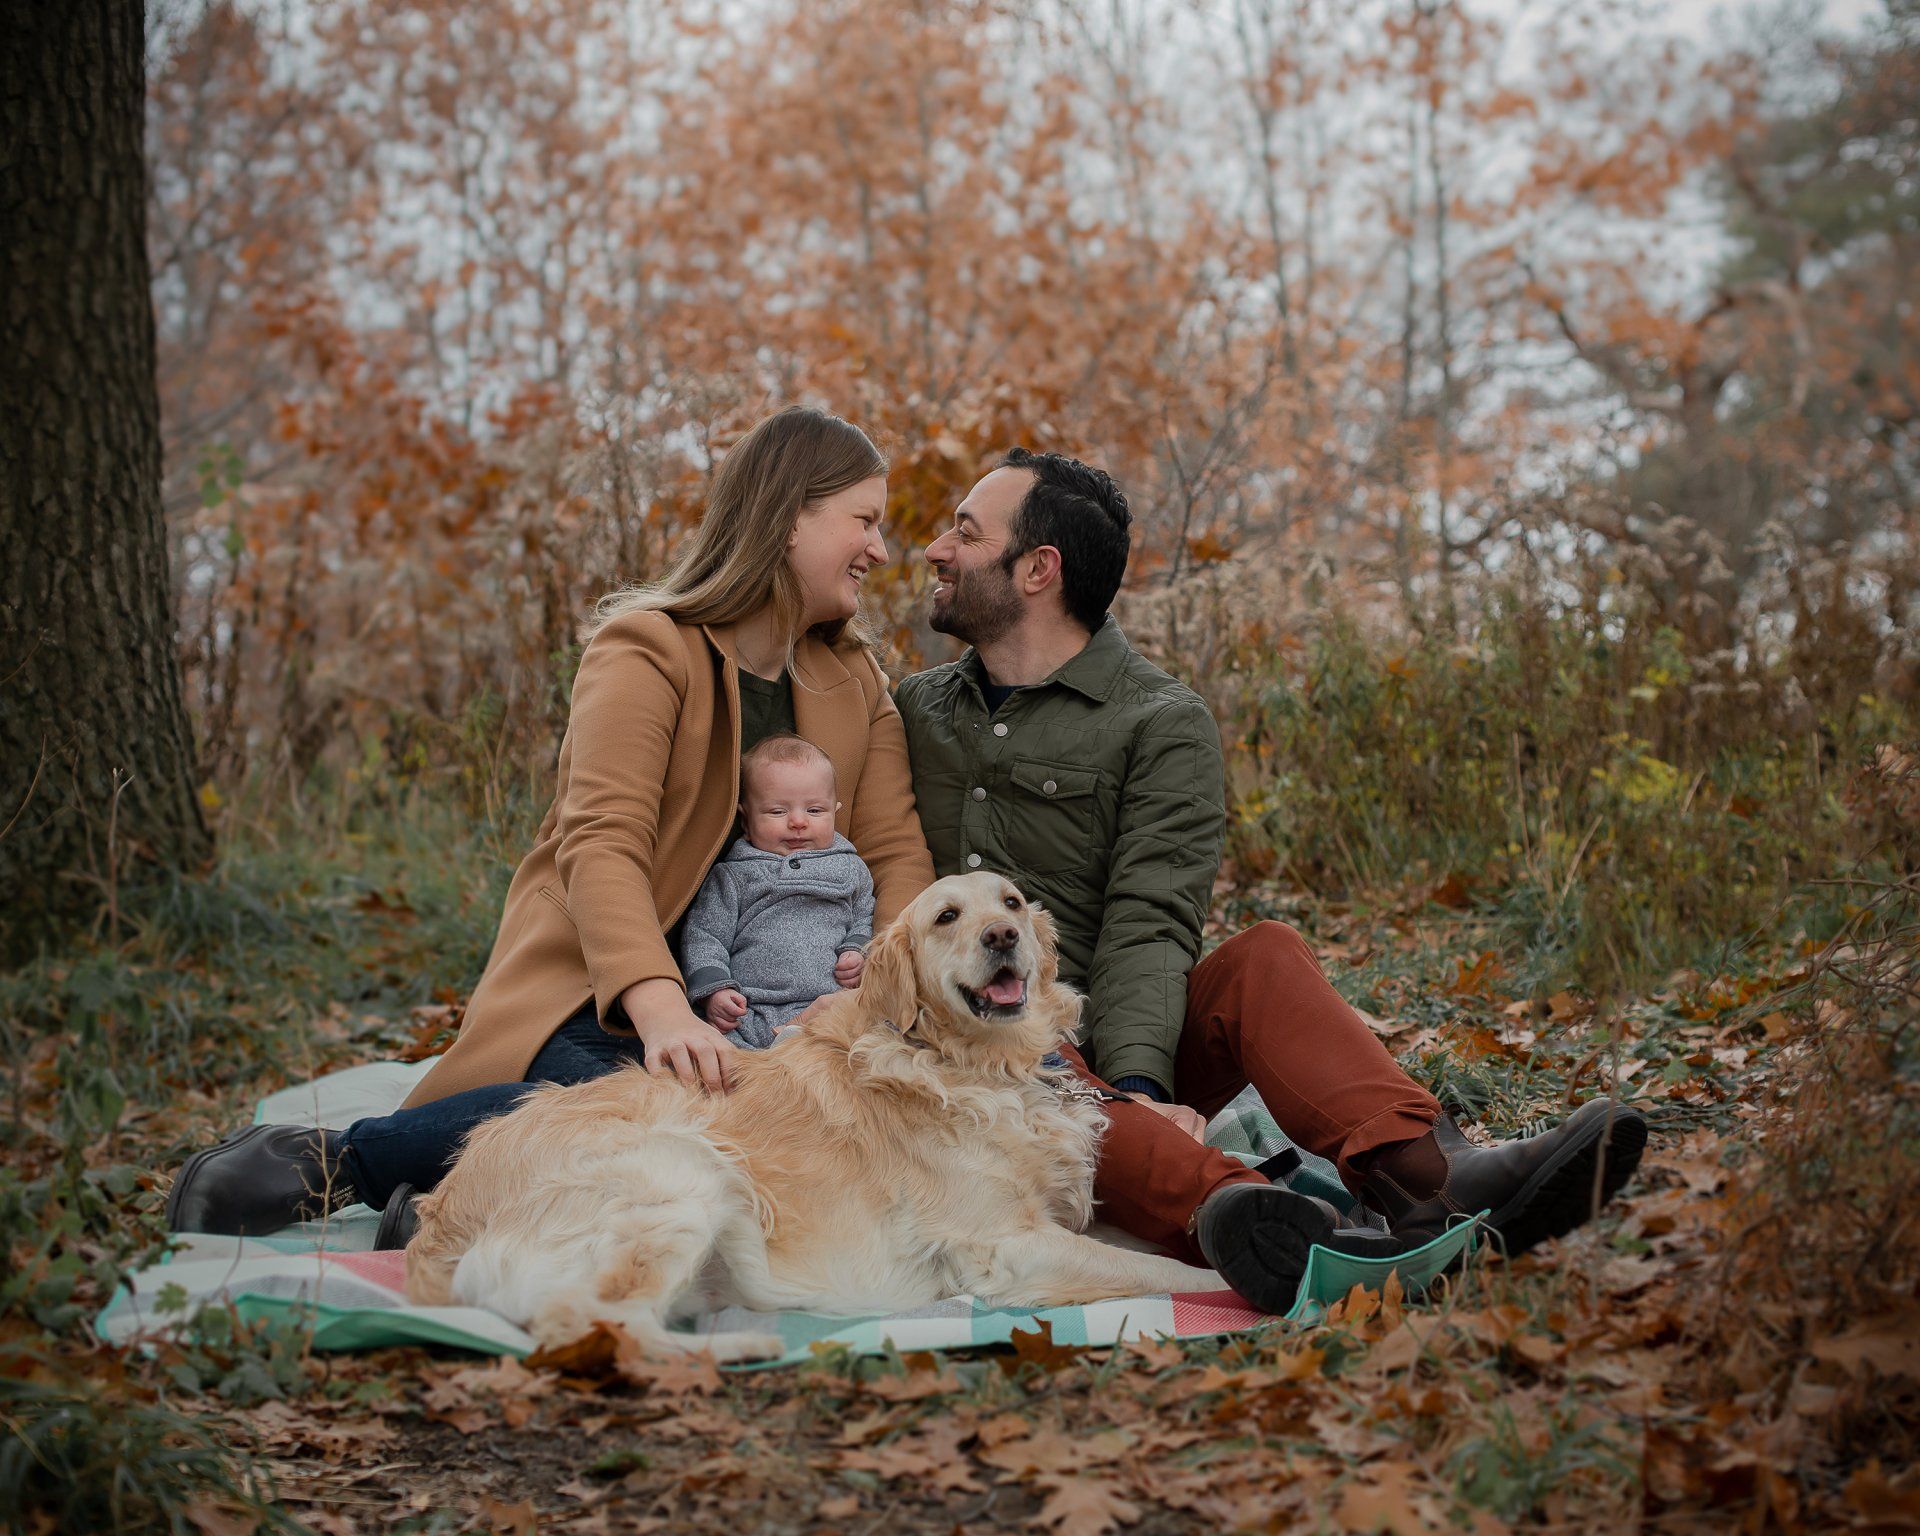 Family photographer Toronto | Stacey Naglie | Man and woman with baby and dog sitting on blanket while outdoors